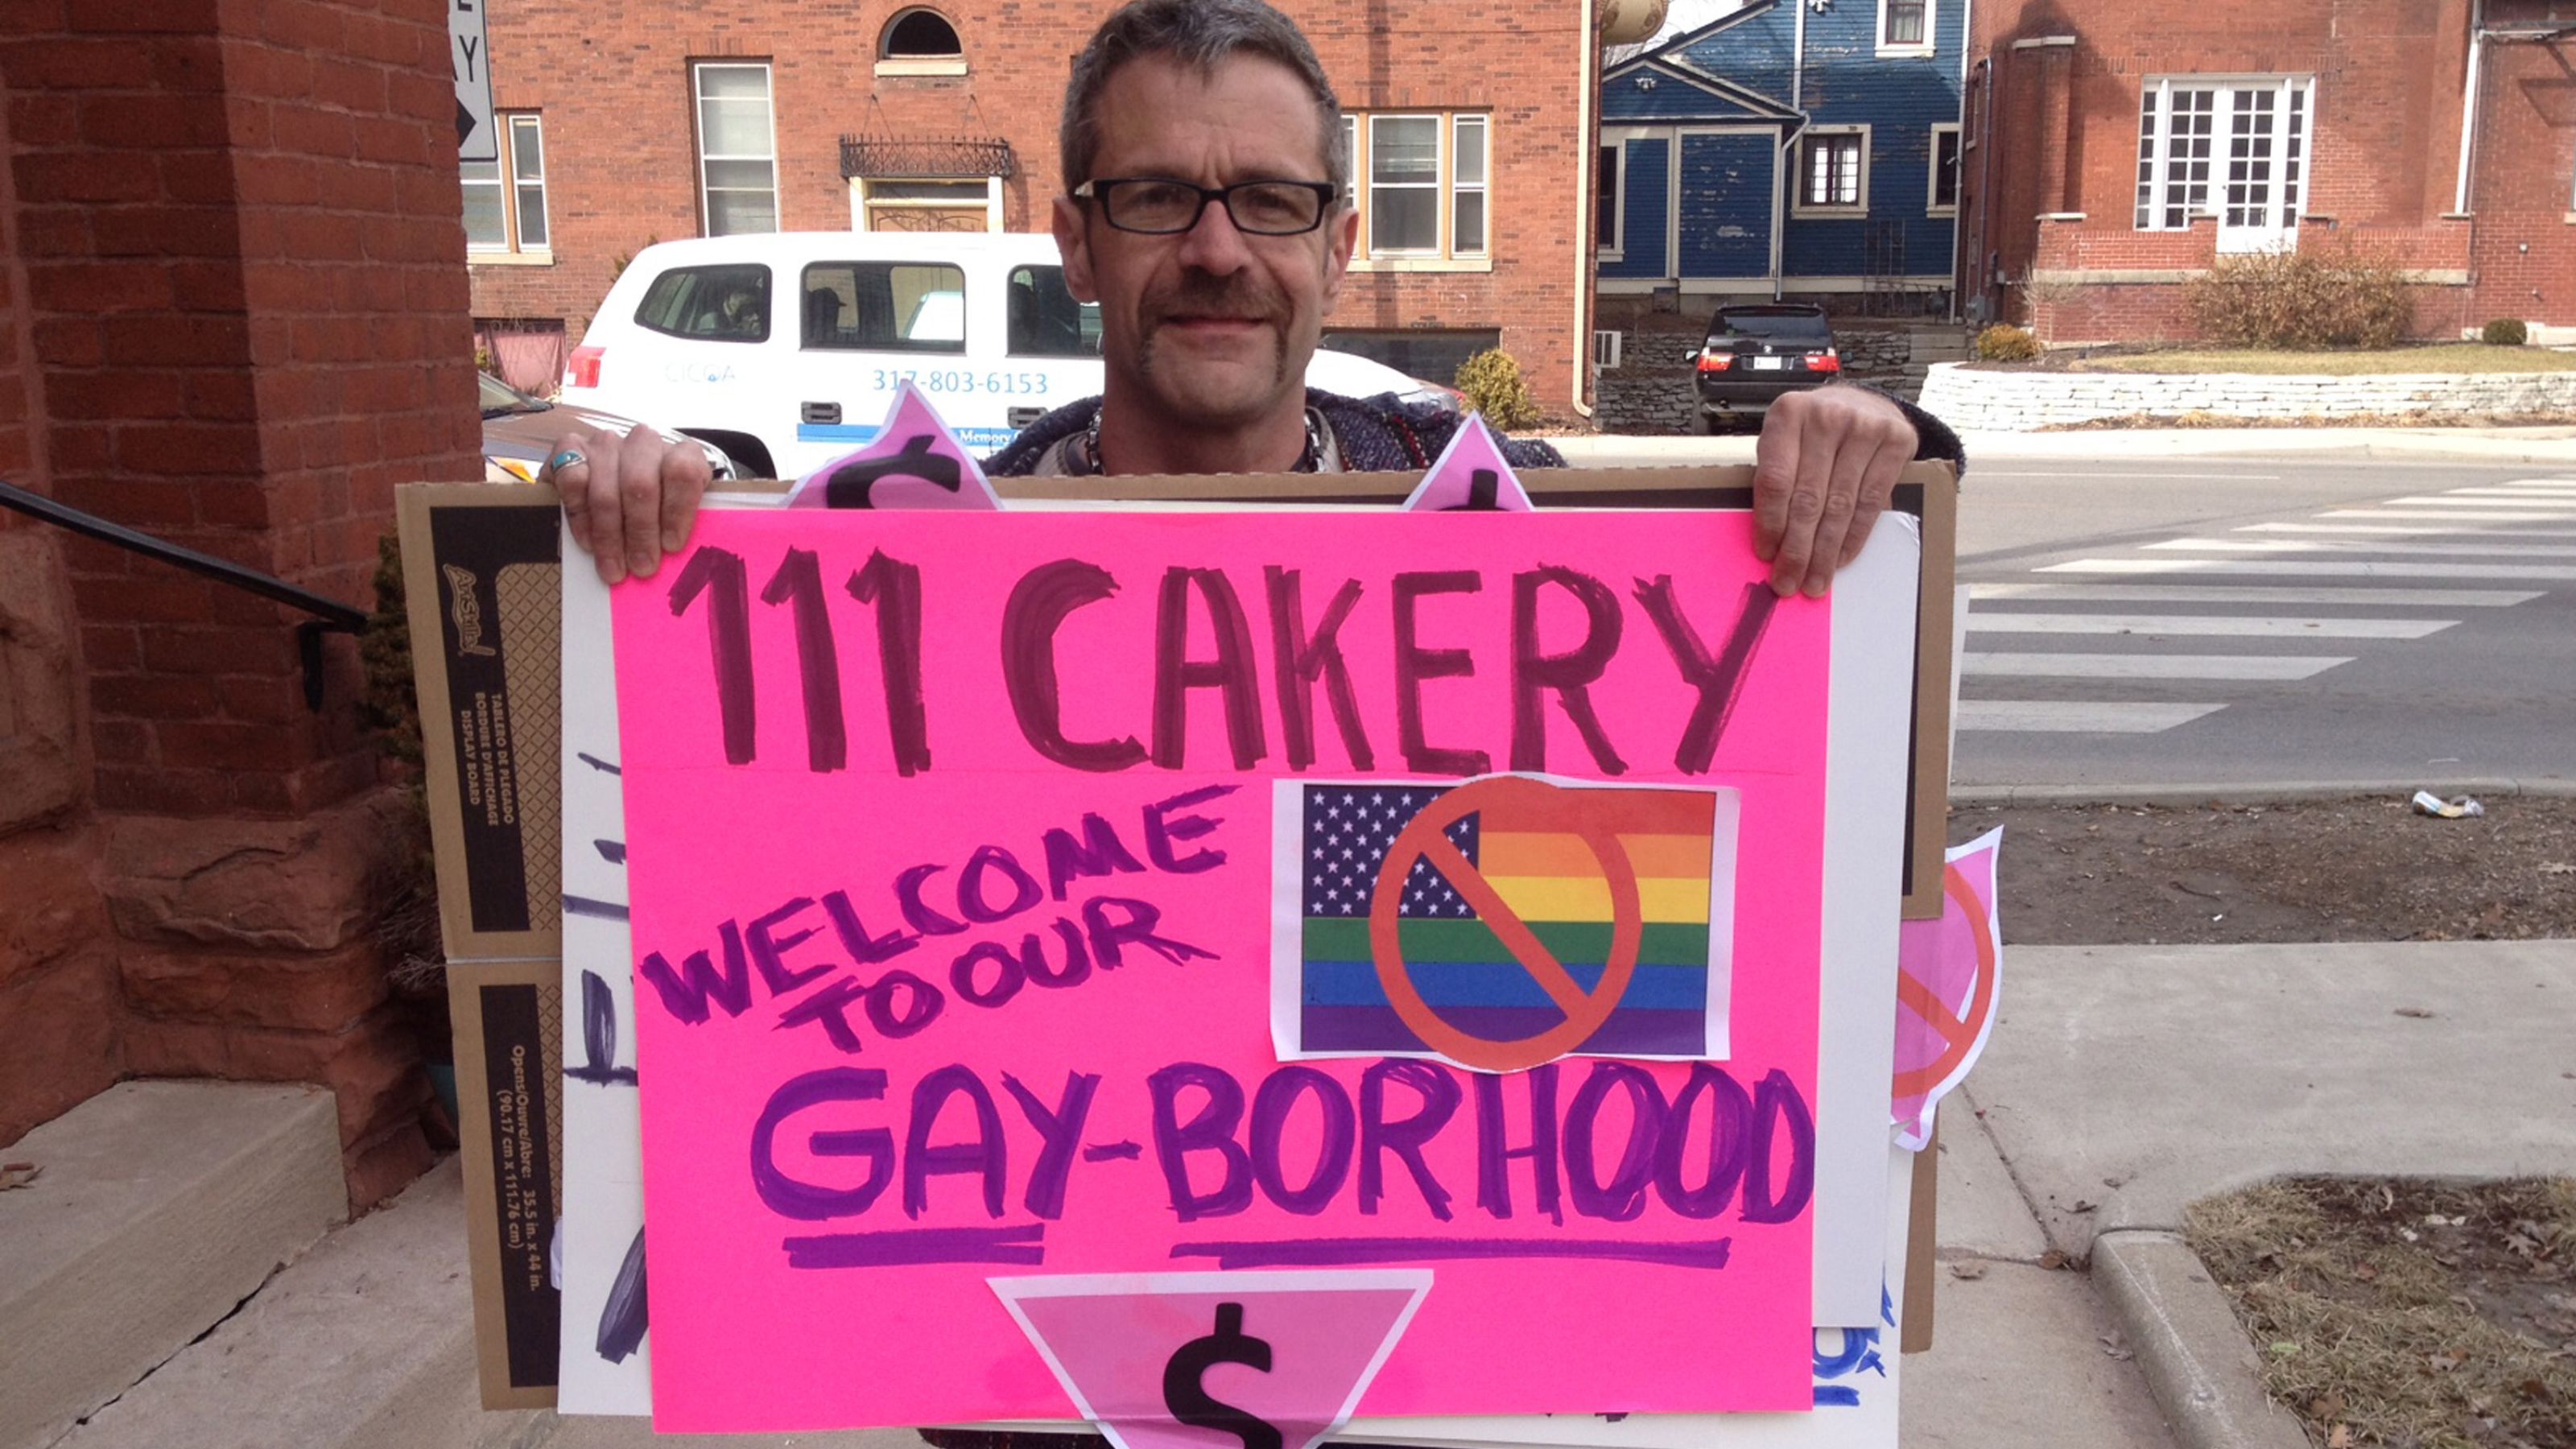 Owners who refused cake for gay couple close shop